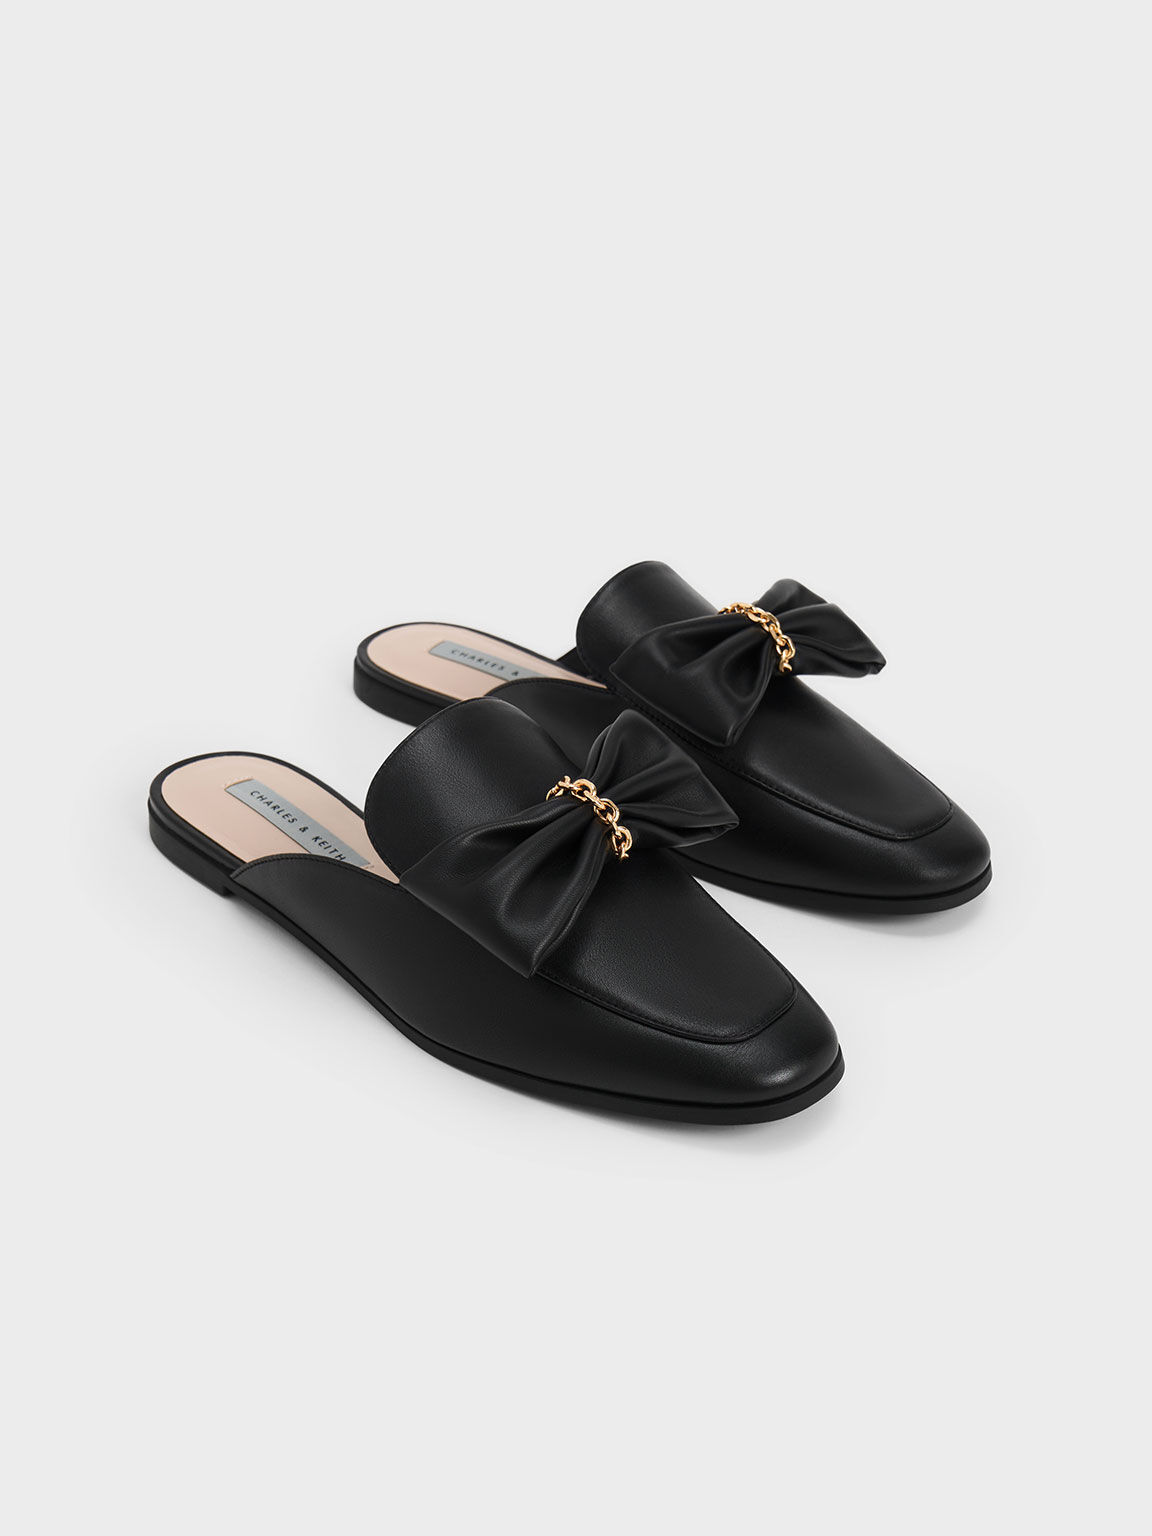 Chain-Link Bow Loafer Mules, Black, hi-res